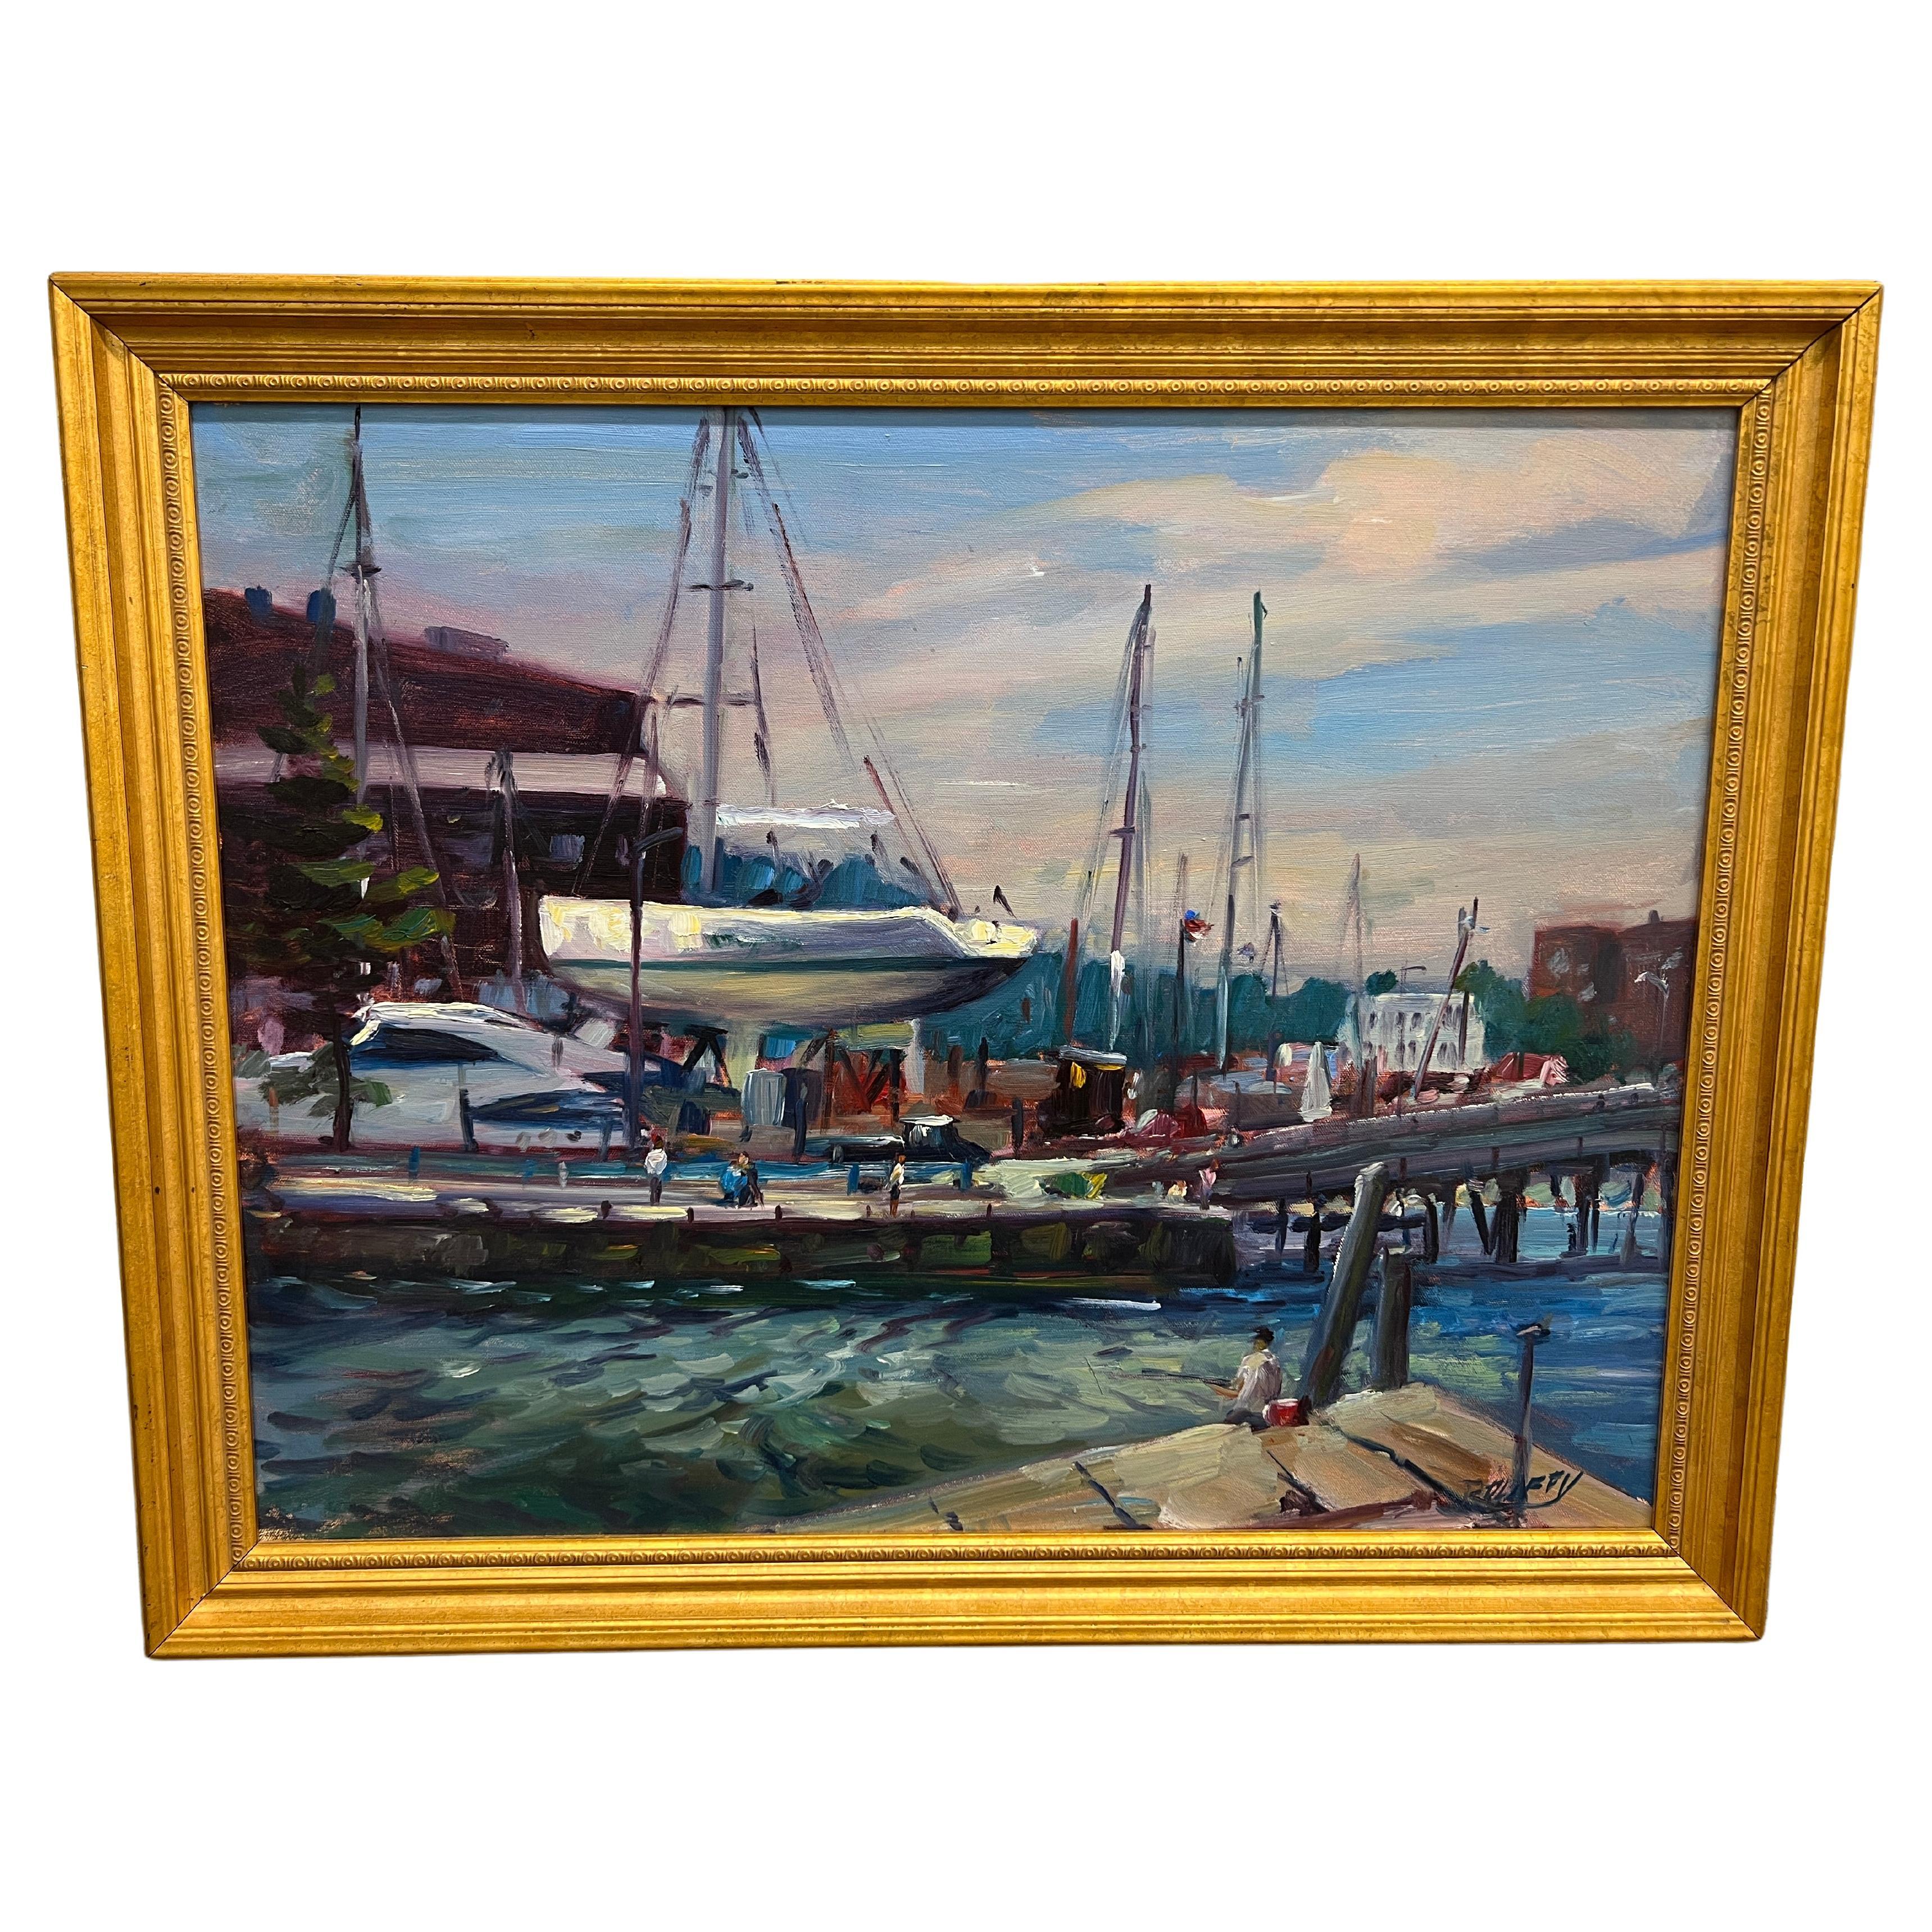 Robert Duffy (American, 1928-2015), Painting of a Harbor Fisherman in Newport For Sale